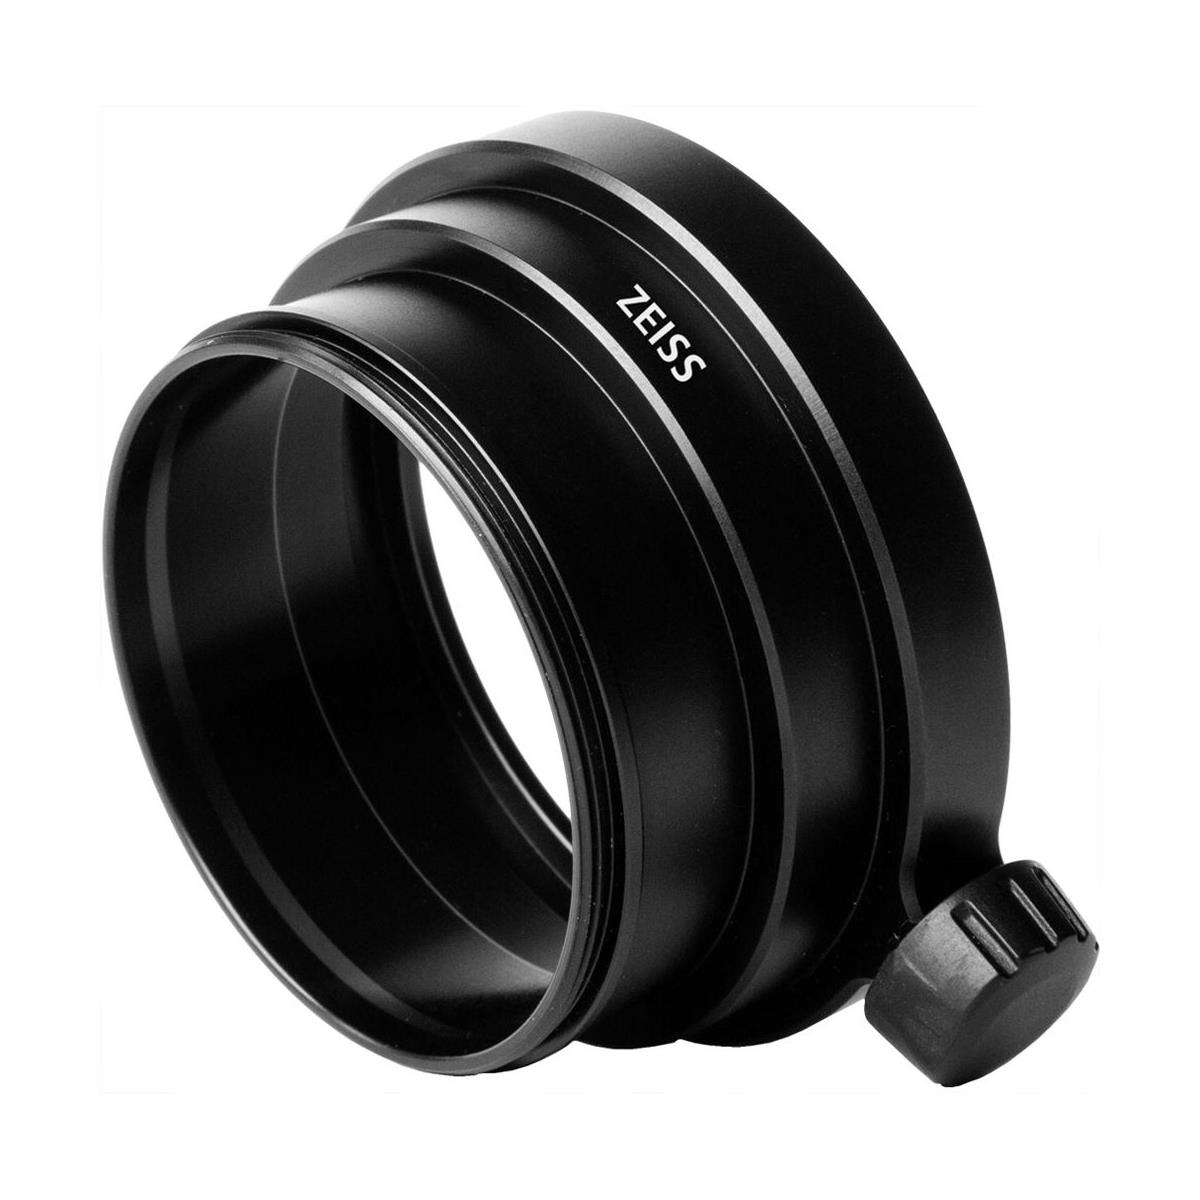 Image of Zeiss M58 Photo Lens Adaptor for Victory Harpia Spotting Scope